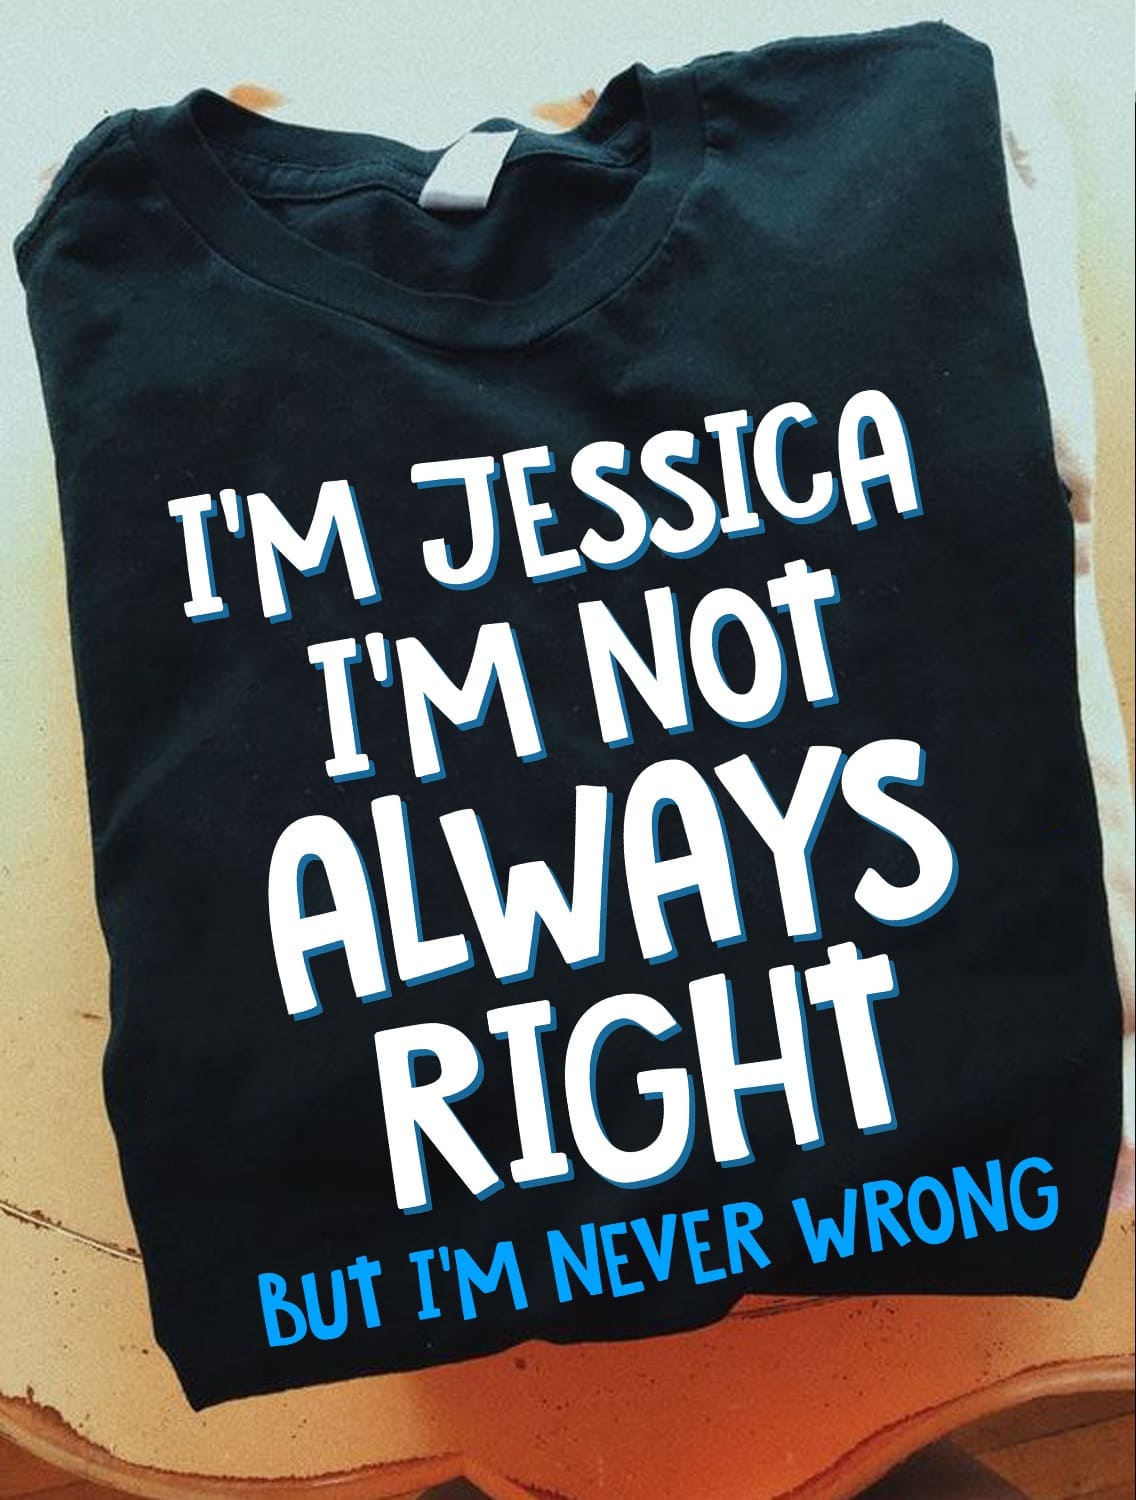 I'm jessica i'm not always rights but i'm never wrong